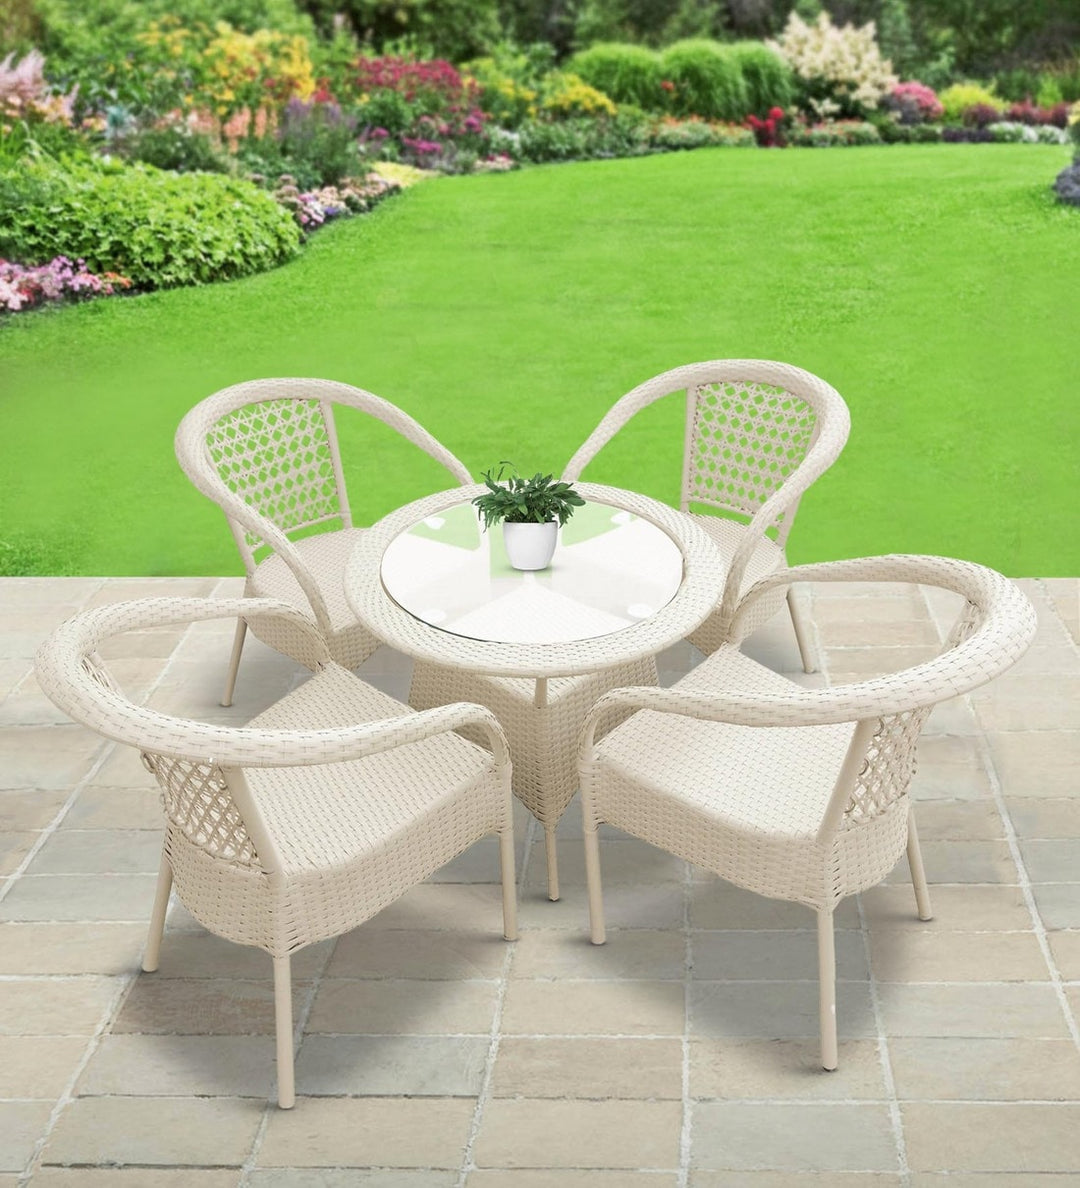 Dreamline Outdoor Furniture Garden Patio Seating Set 1+4 4 Chairs and Table Set Balcony Furniture Coffee Table Set (White)